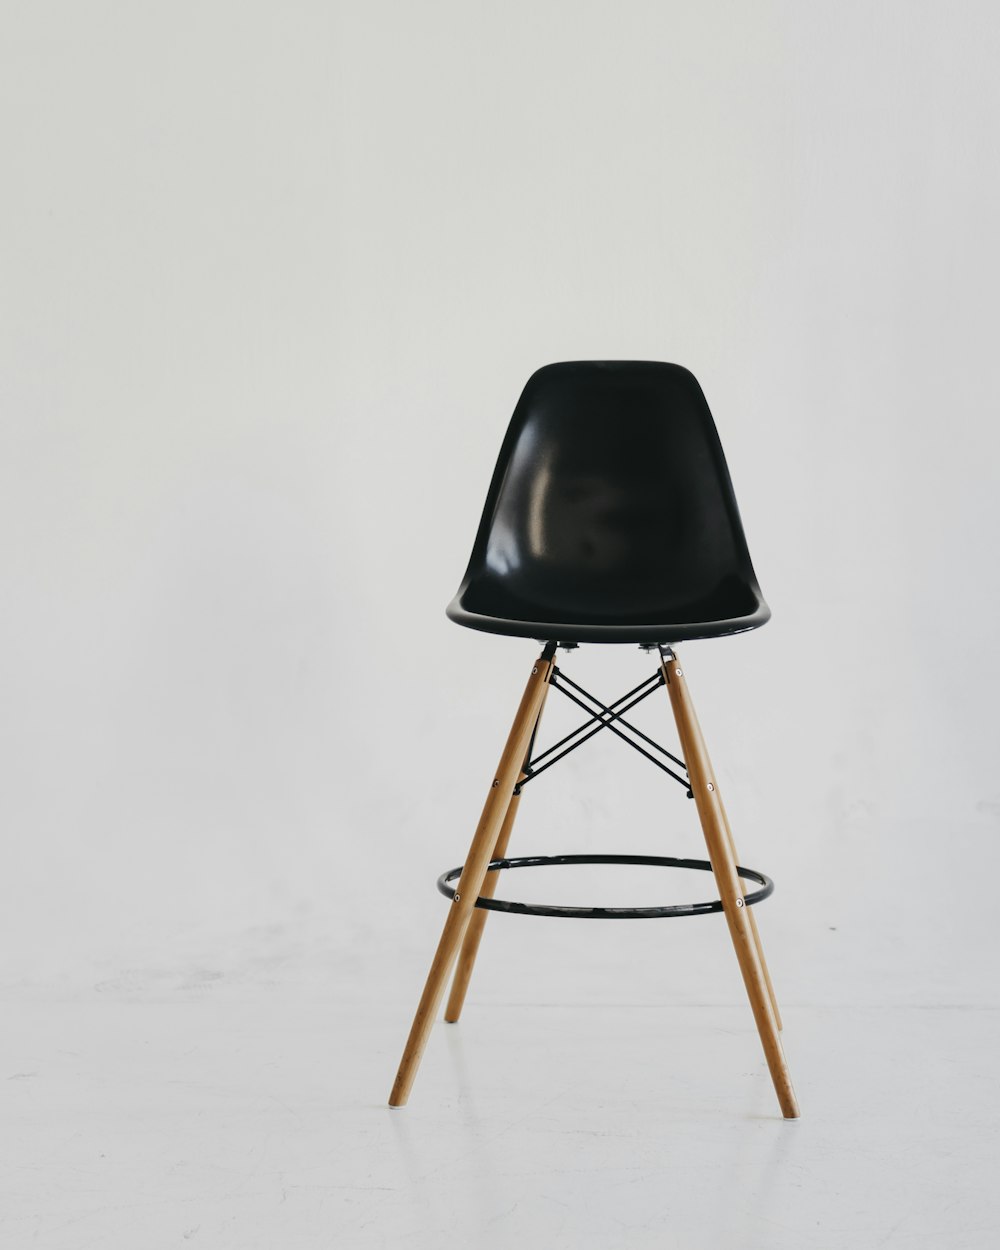 20+ Chair Pictures | Download Free Images On Unsplash